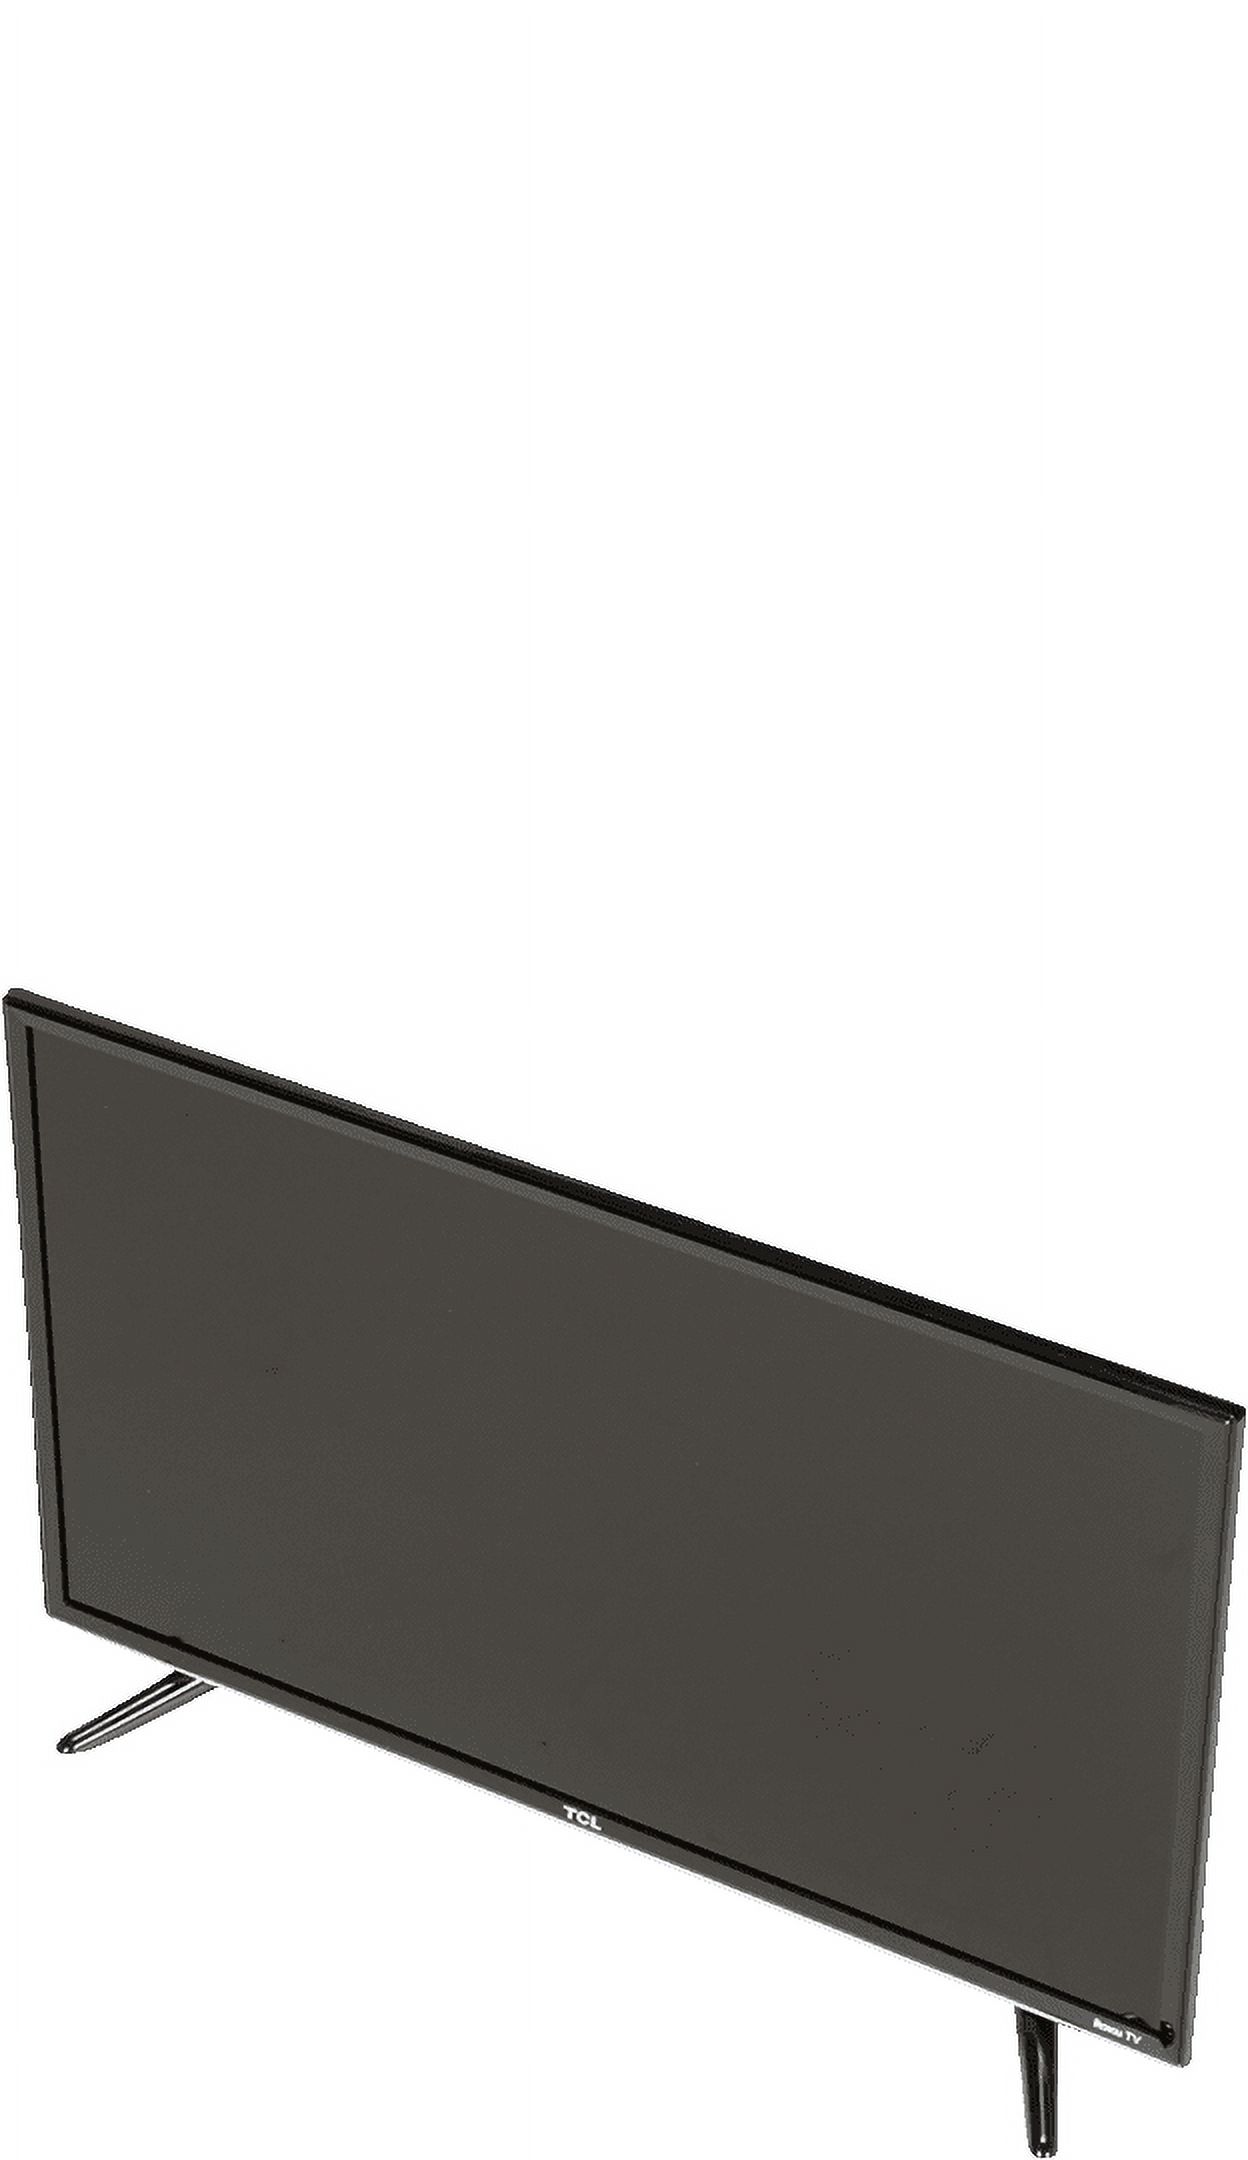 32" 720p LED TV With Roku - image 13 of 19